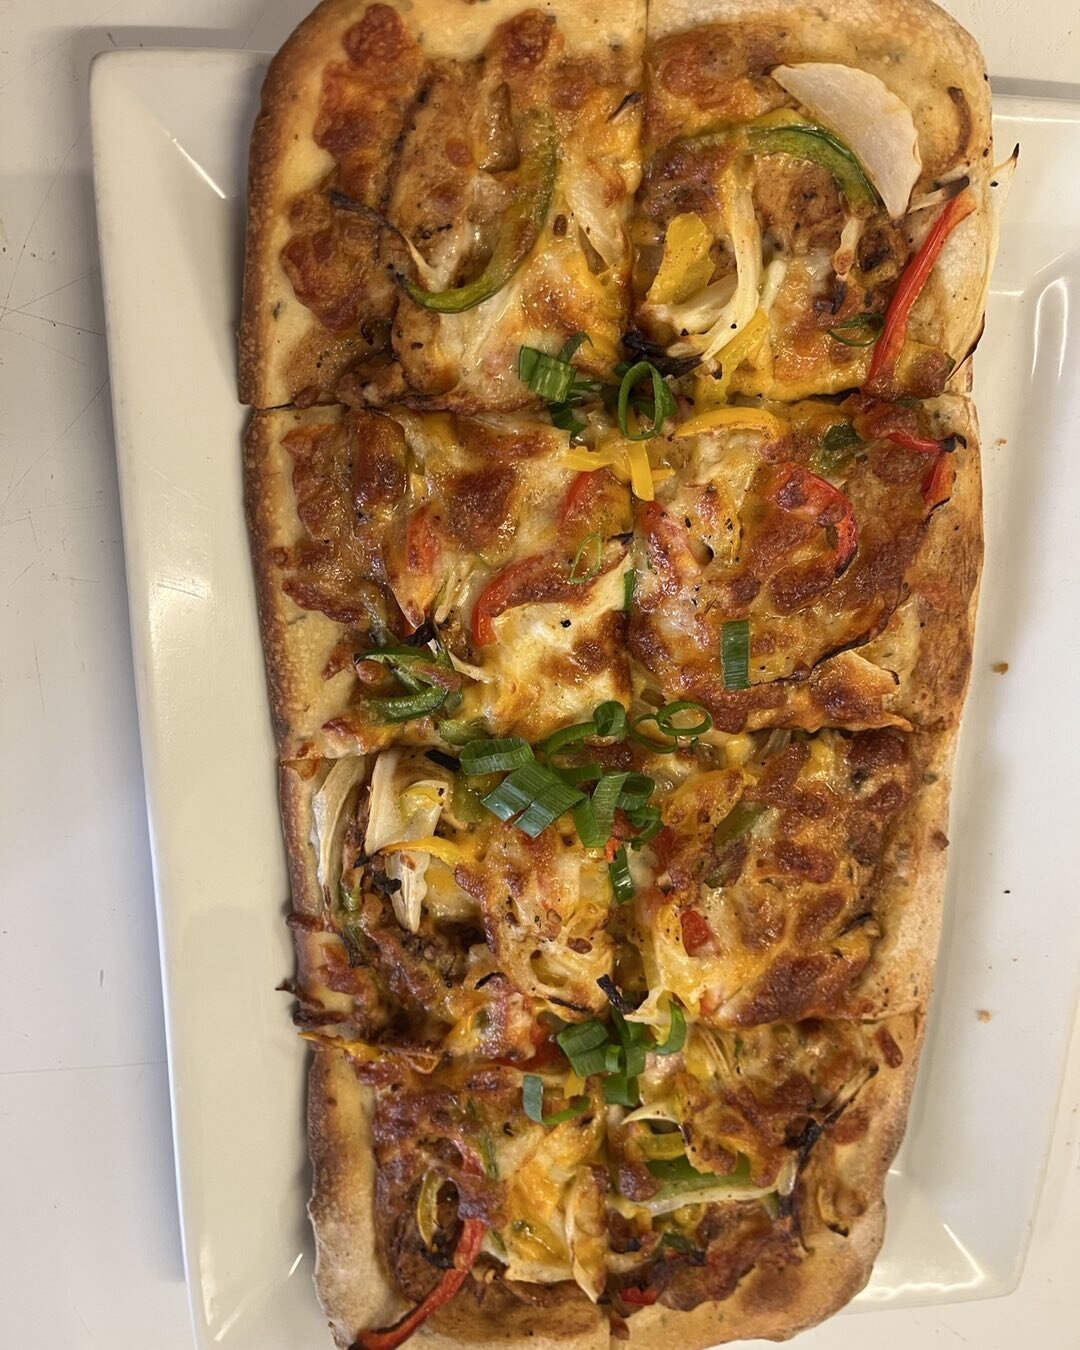 New!  Chicken Fajita Flatbread Seasoned grilled chicken multi color bell pepper onions our secret sauce cheddar and mozzarella cheese topped with green onions and a side of sour cream.  A little heat and filled with flavor.